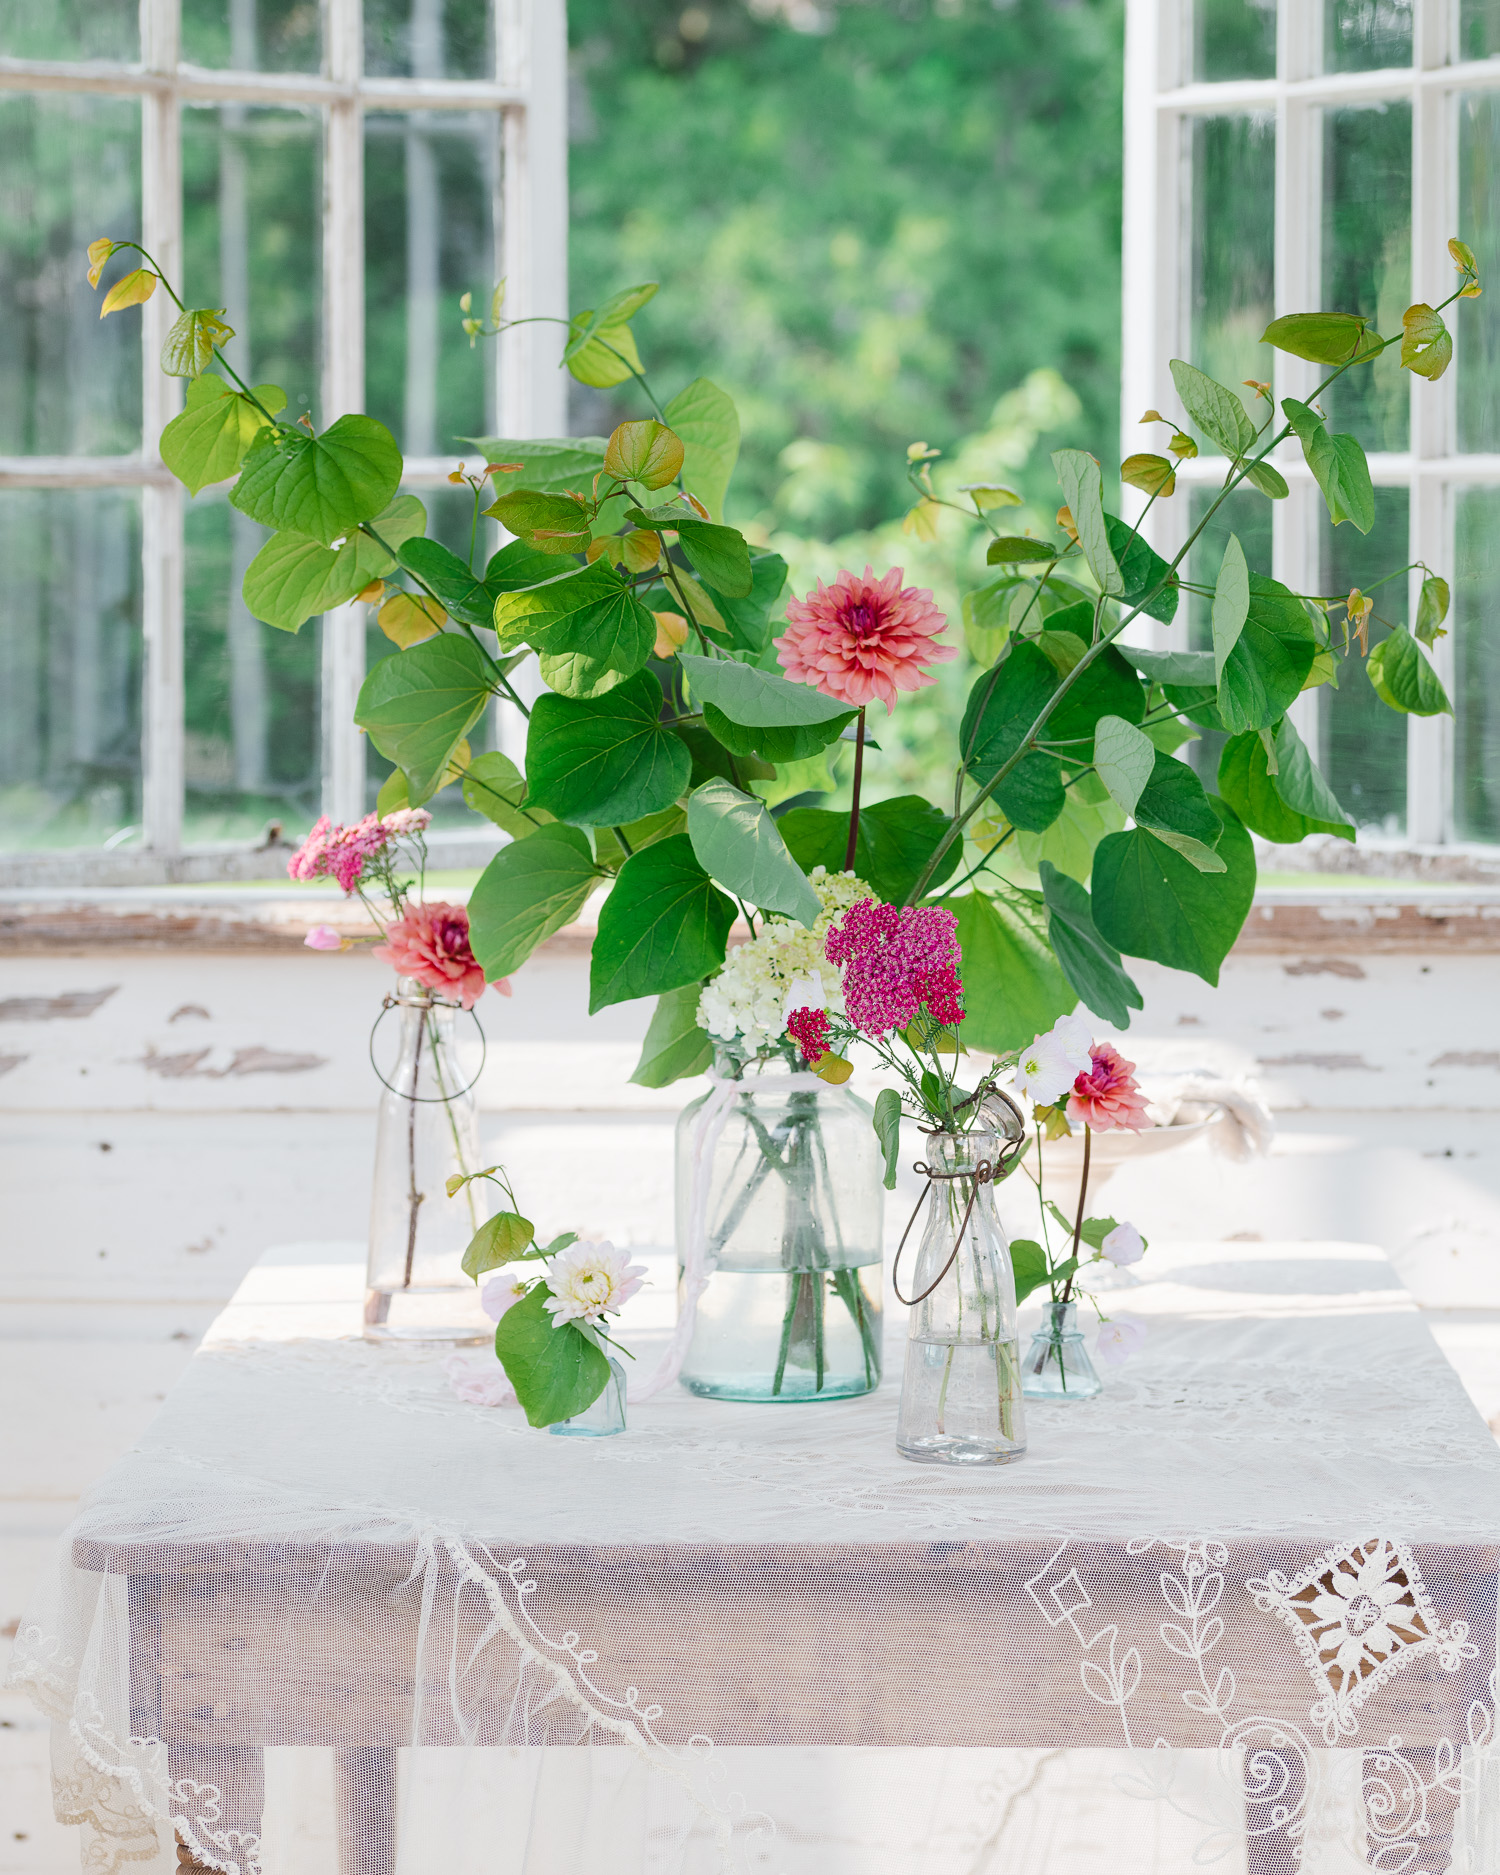 The Flower House. Antique lace, flowers in vintage vases.